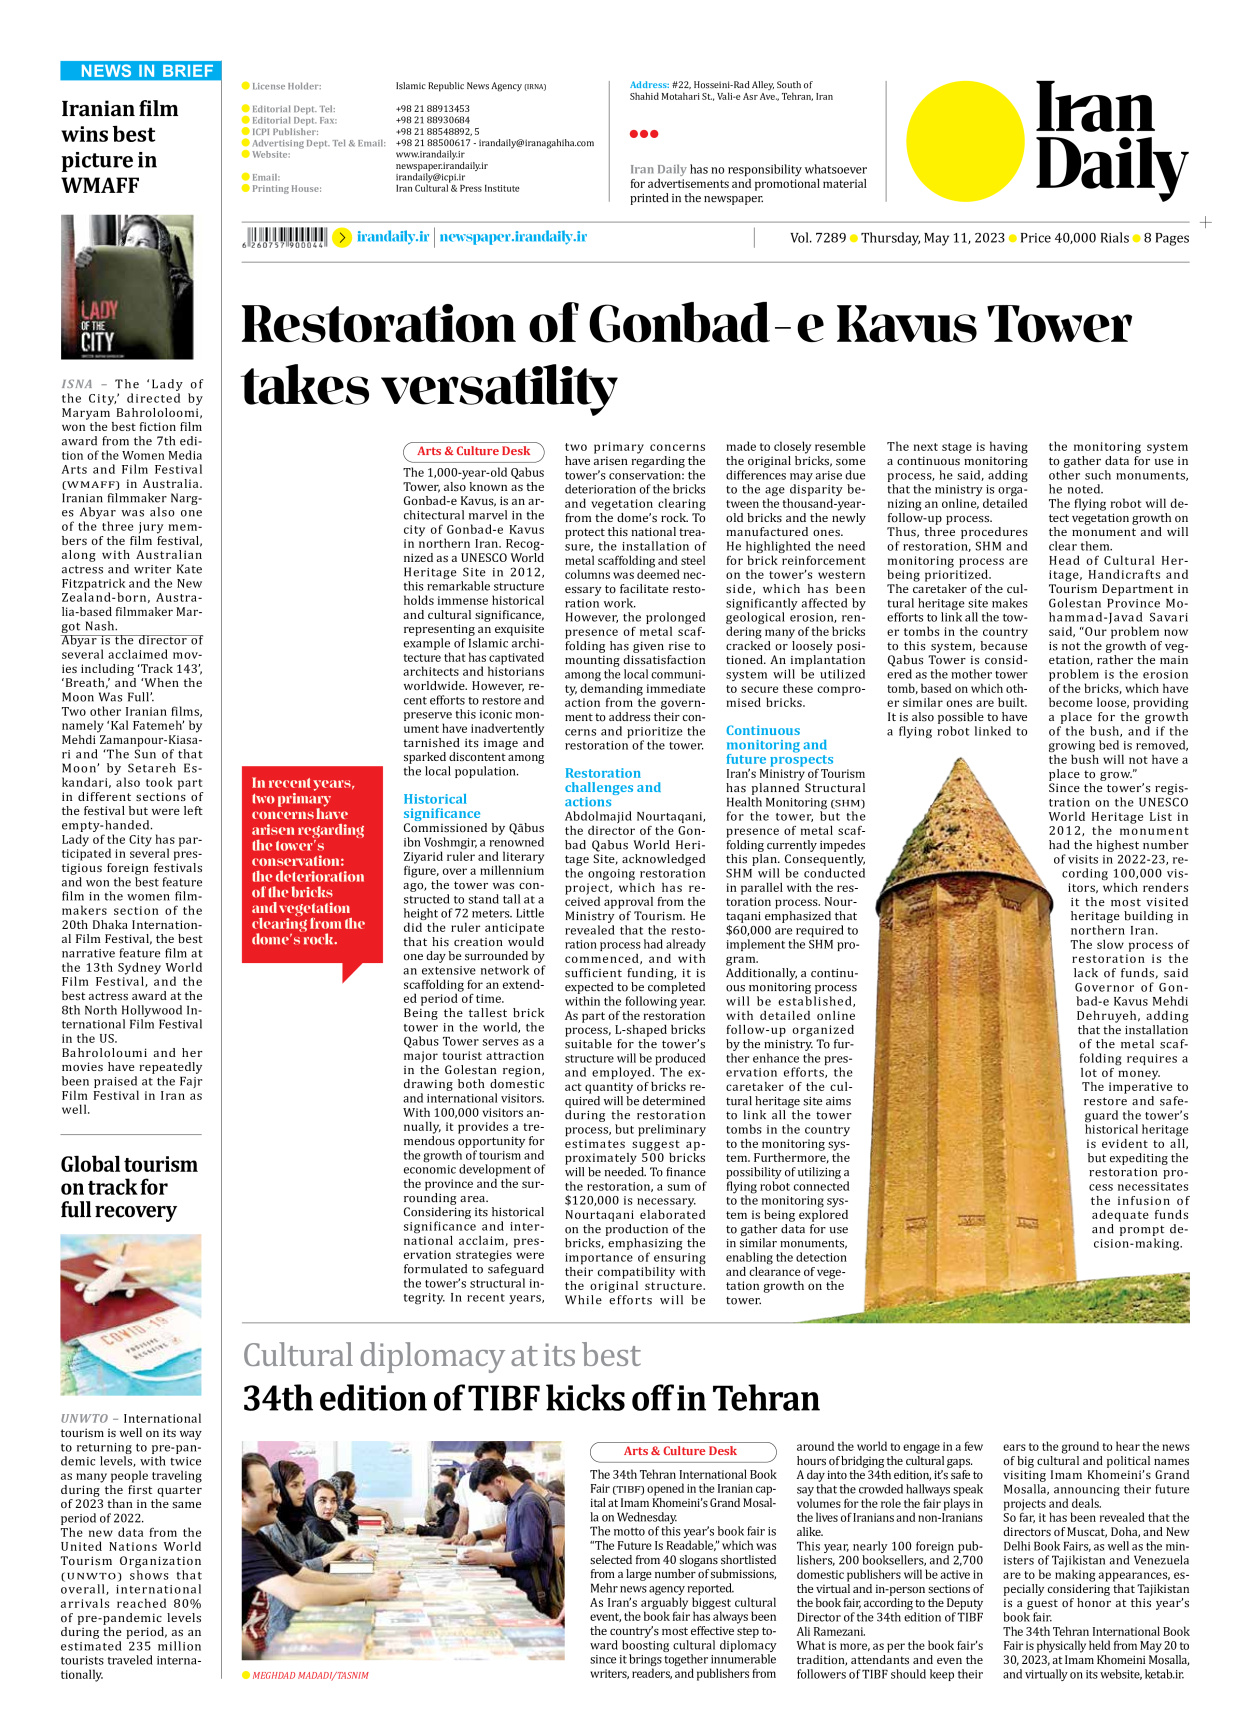 Iran Daily - Number Seven Thousand Two Hundred and Eighty Nine - 11 May 2023 - Page 8